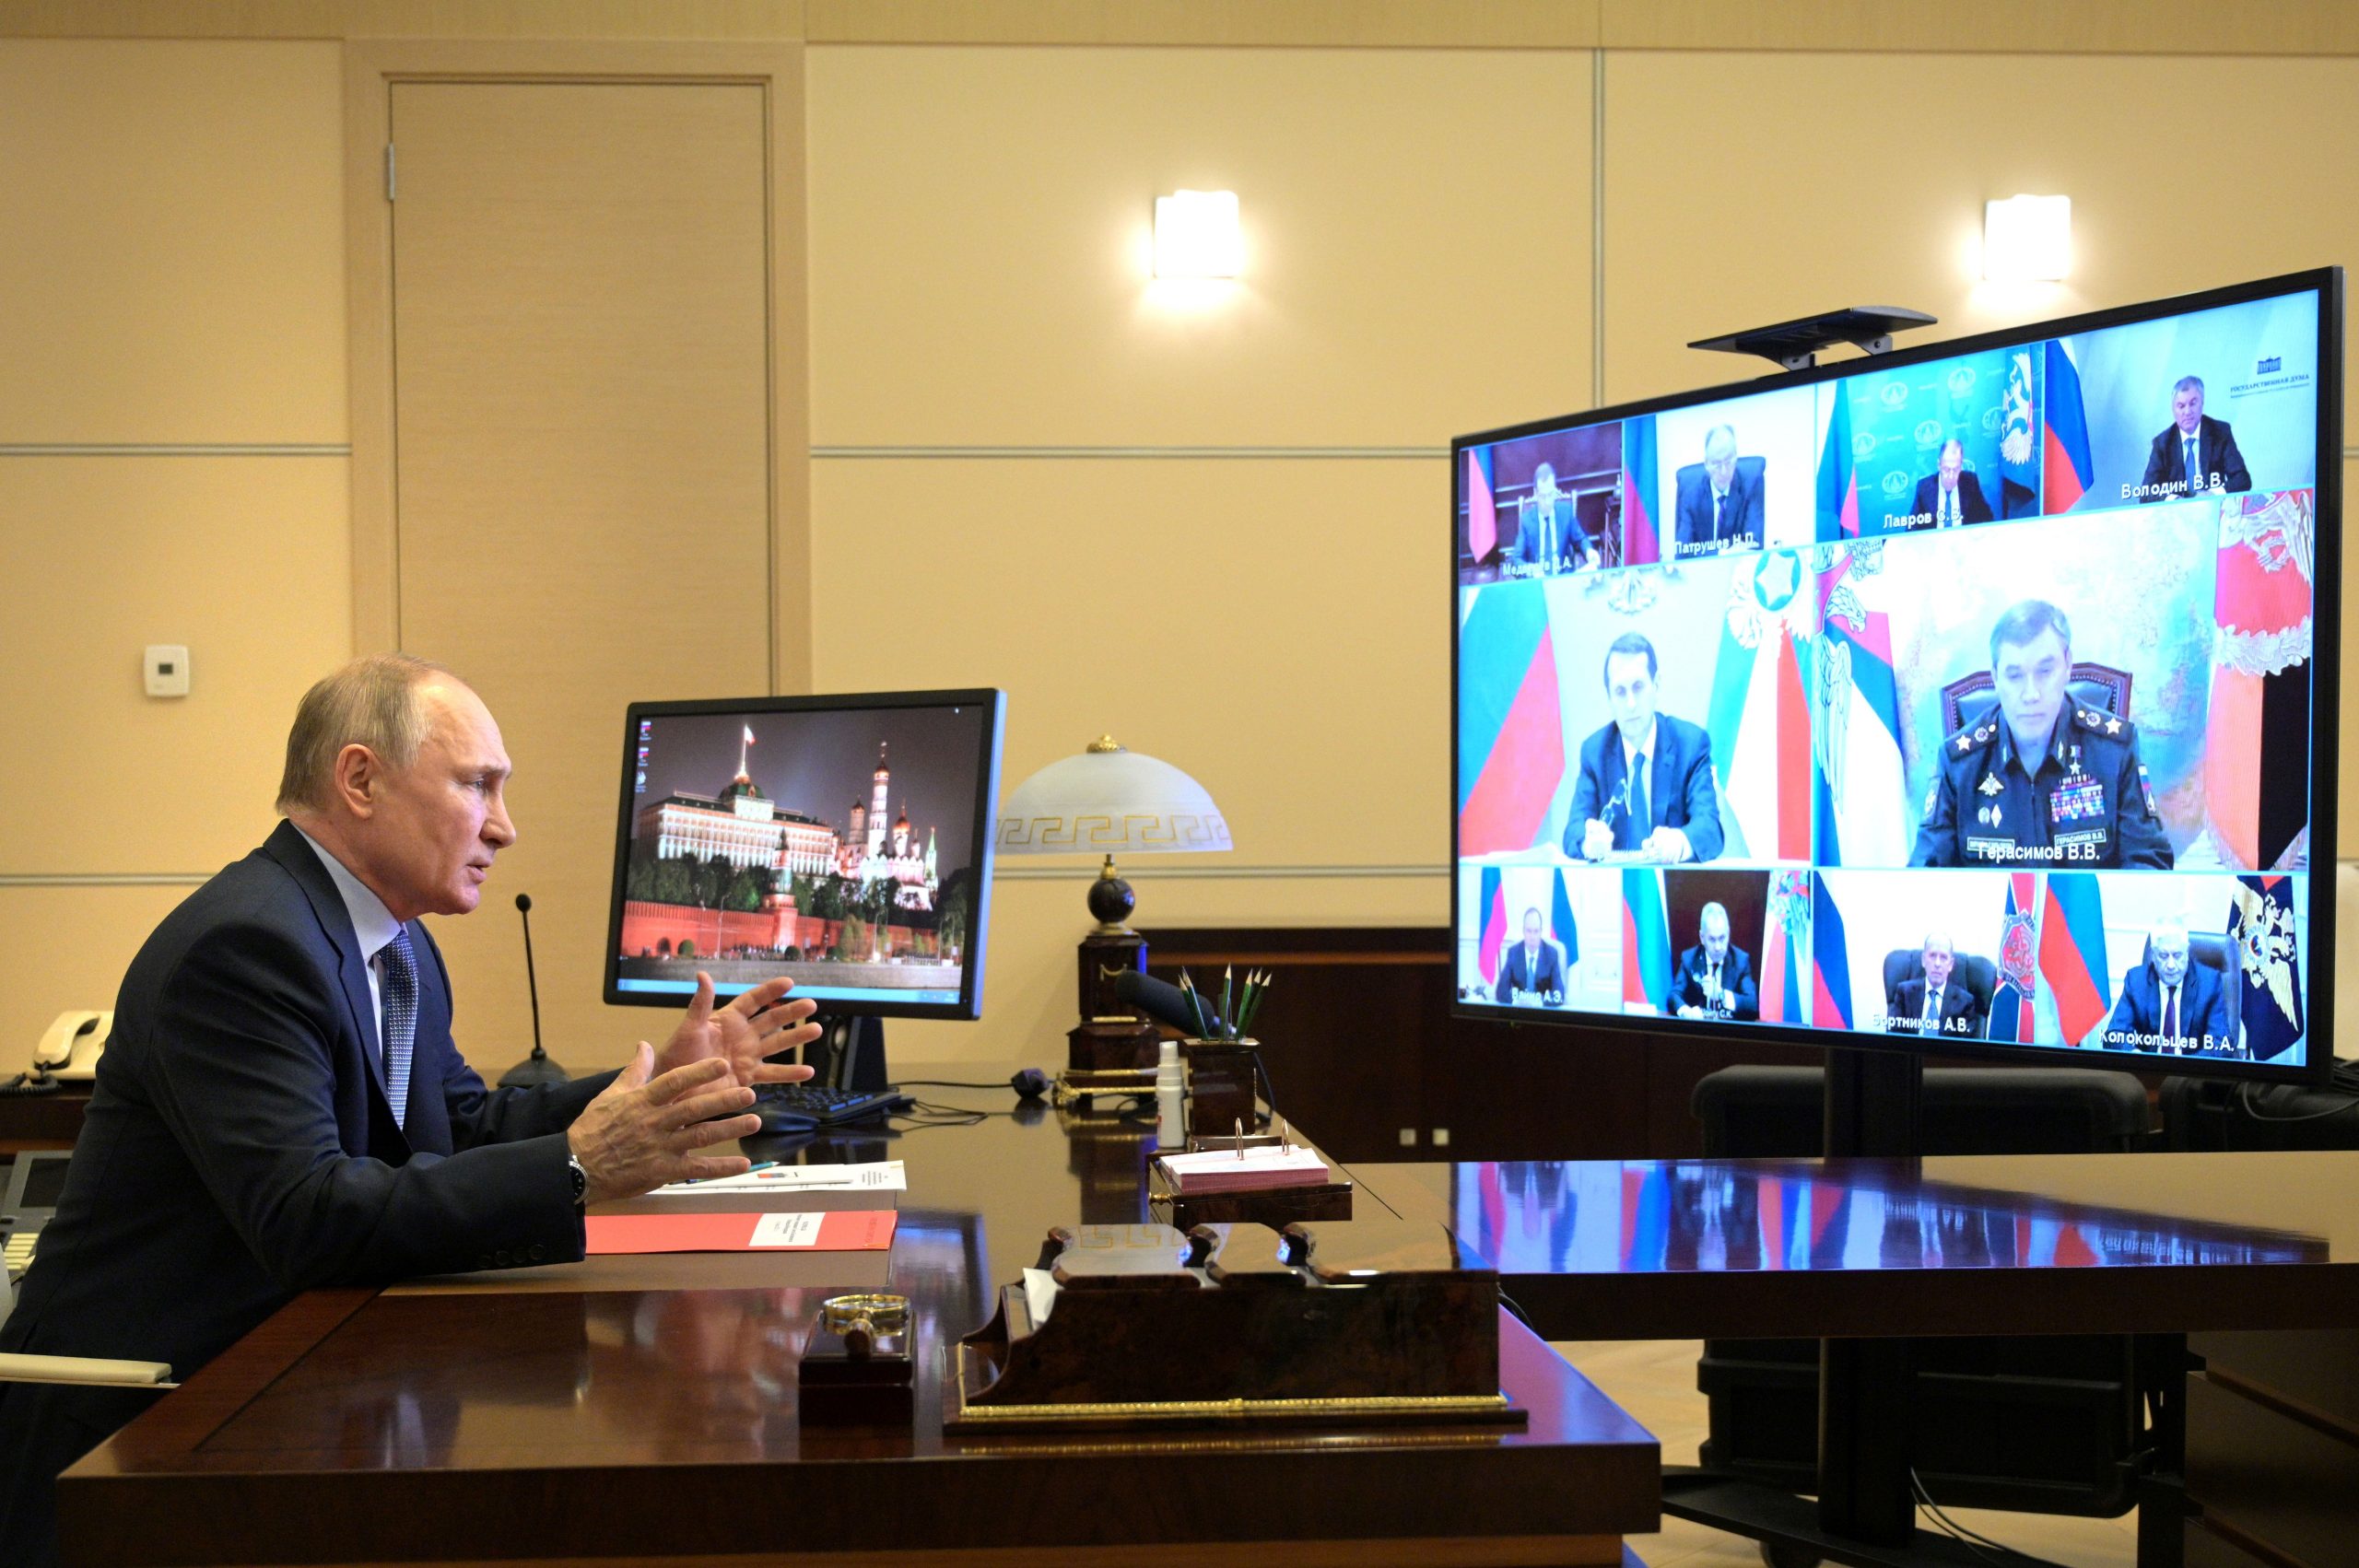 Russia's President Putin takes part in a video conference call with members of the Security Council outside Moscow Russia's President Vladimir Putin takes part in a video conference call with members of the Security Council at the Novo-Ogaryovo state residence outside Moscow, Russia April 16, 2021. Sputnik/Alexei Druzhinin/Kremlin via REUTERS ATTENTION EDITORS - THIS IMAGE WAS PROVIDED BY A THIRD PARTY. SPUTNIK